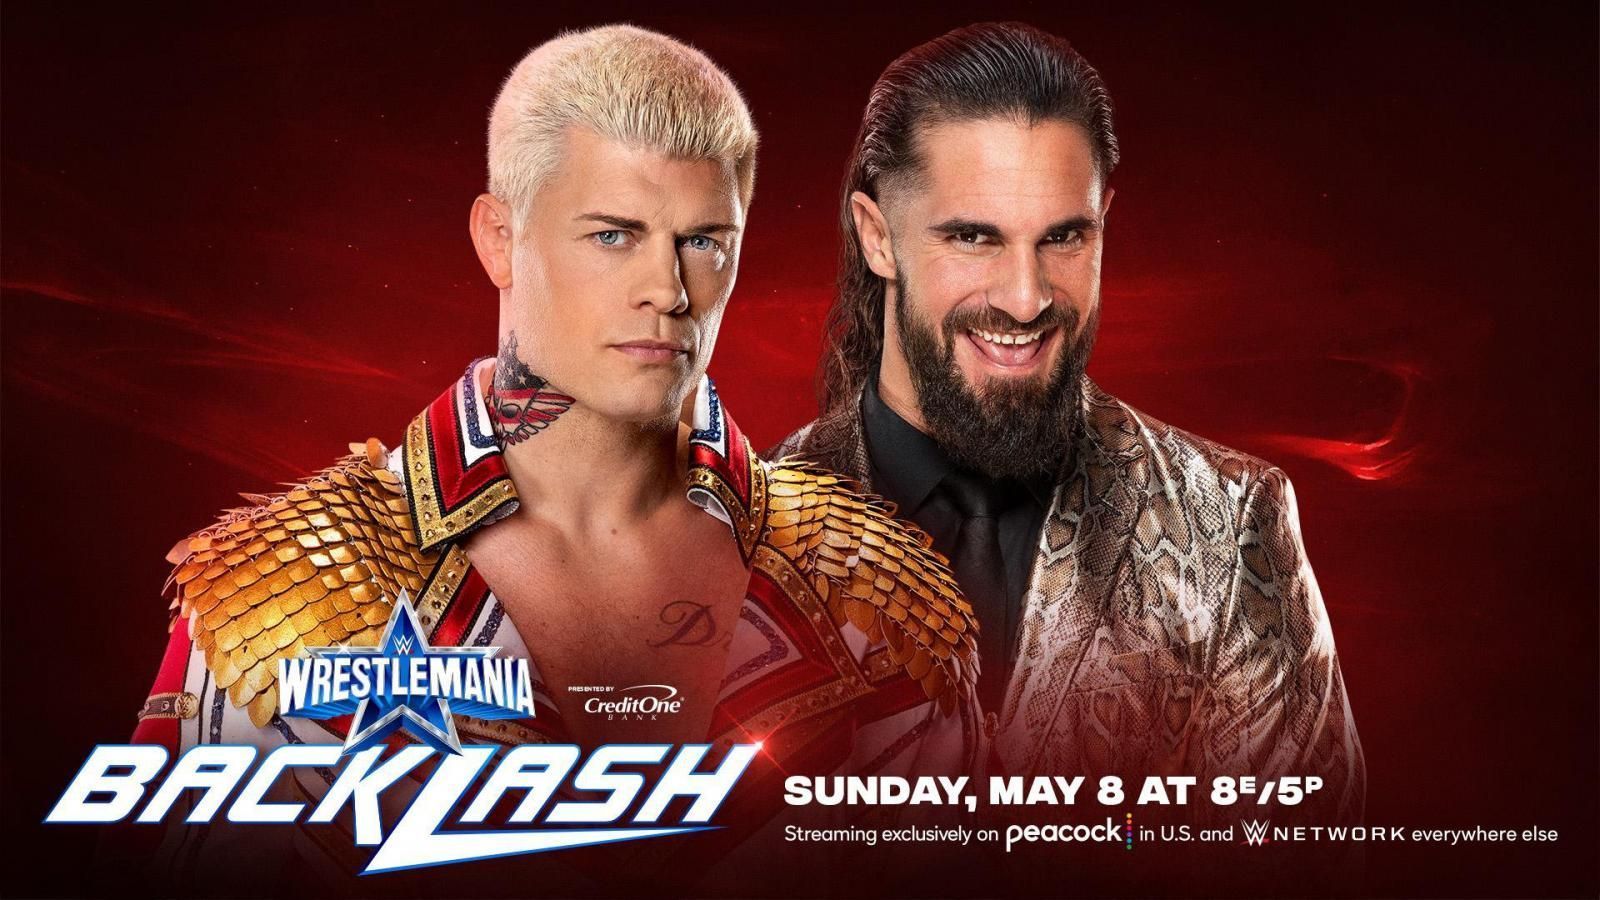 The American Nightmare will once again clash with Seth Rollins